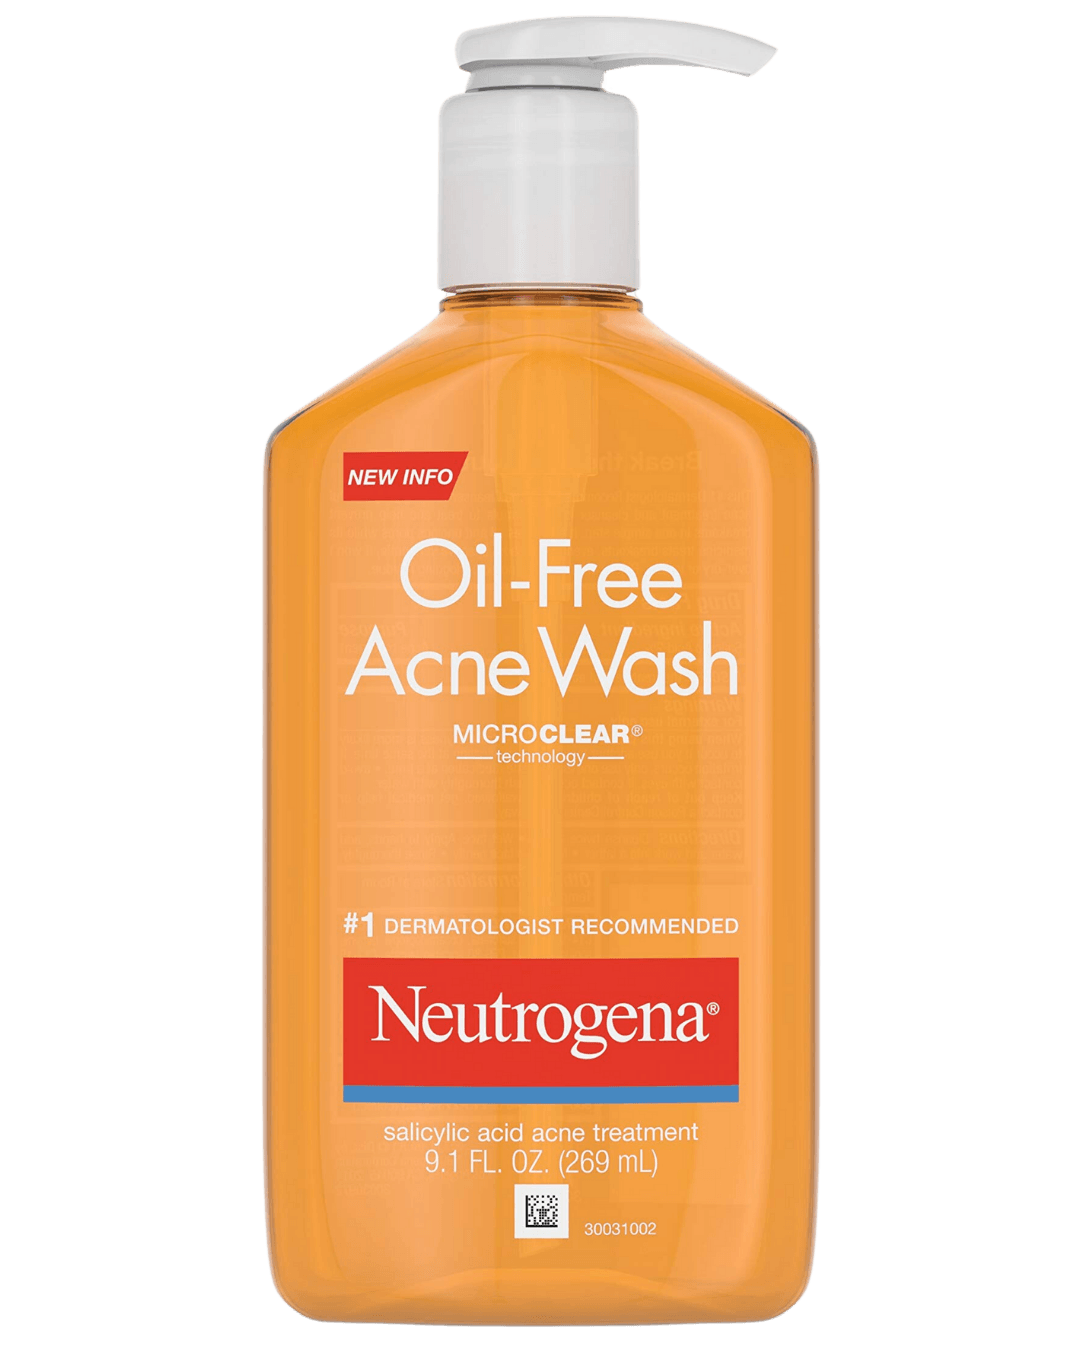 Daily Vanity Beauty Awards 2024 Best  Neutrogena Oil-Free Acne Wash Voted By Beauty Experts